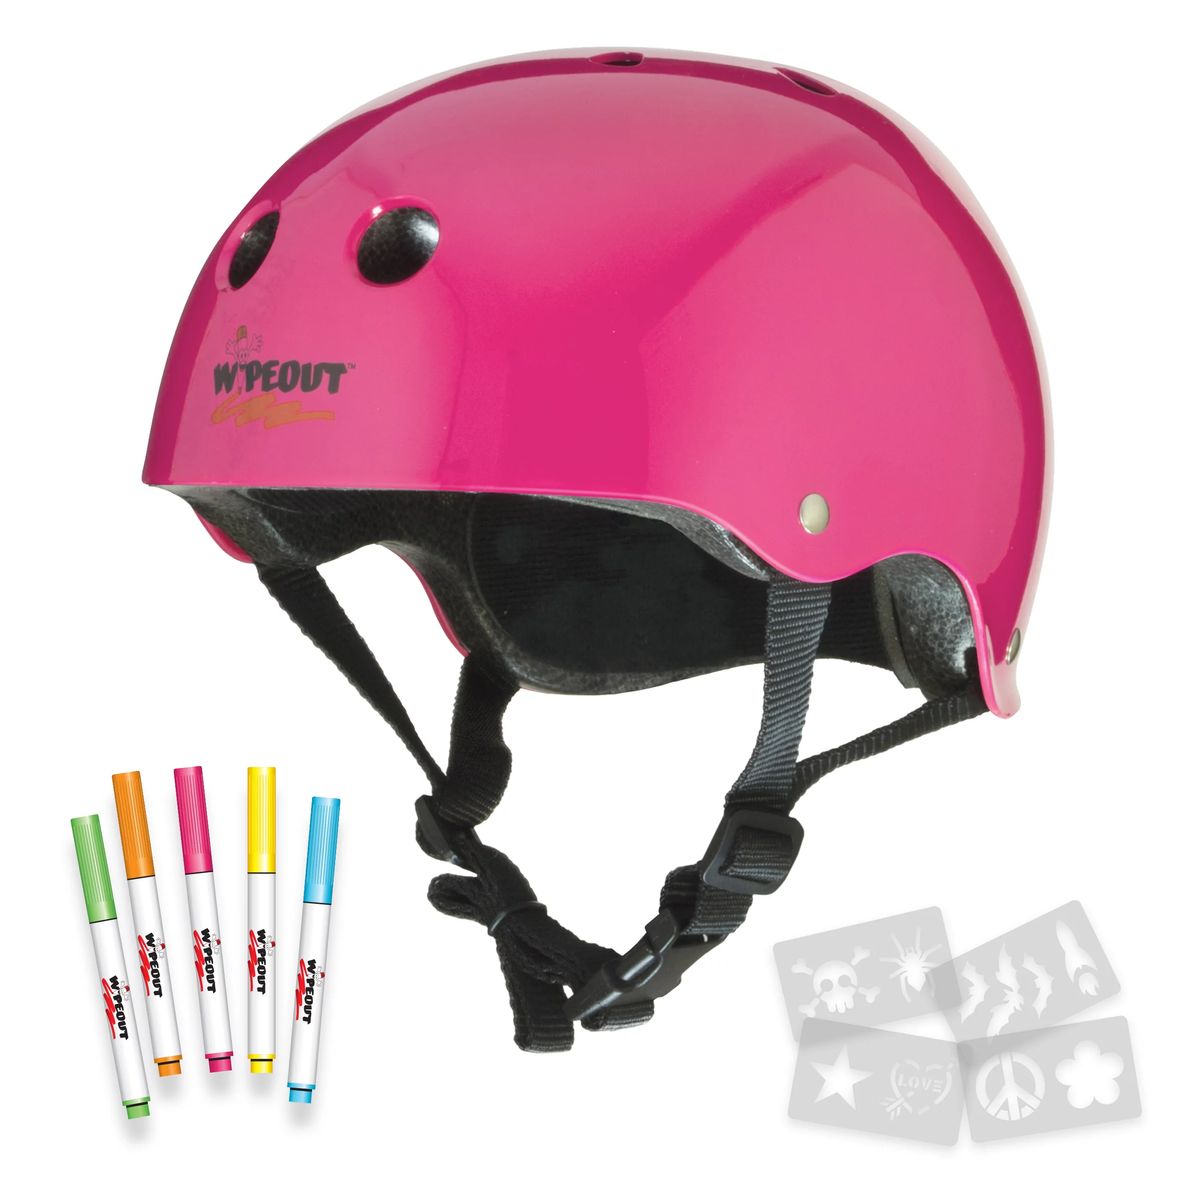 [RDY] [送料無料] Wipeout Dry Erase Kids Helmet for Bike, Skate, and Scooter, Neon Pink, Ages 5+ [楽天海外通販] | Wipeout Dry Erase Kids Helmet for Bike, Skate, and Scooter, Neon Pink, Ages 5+